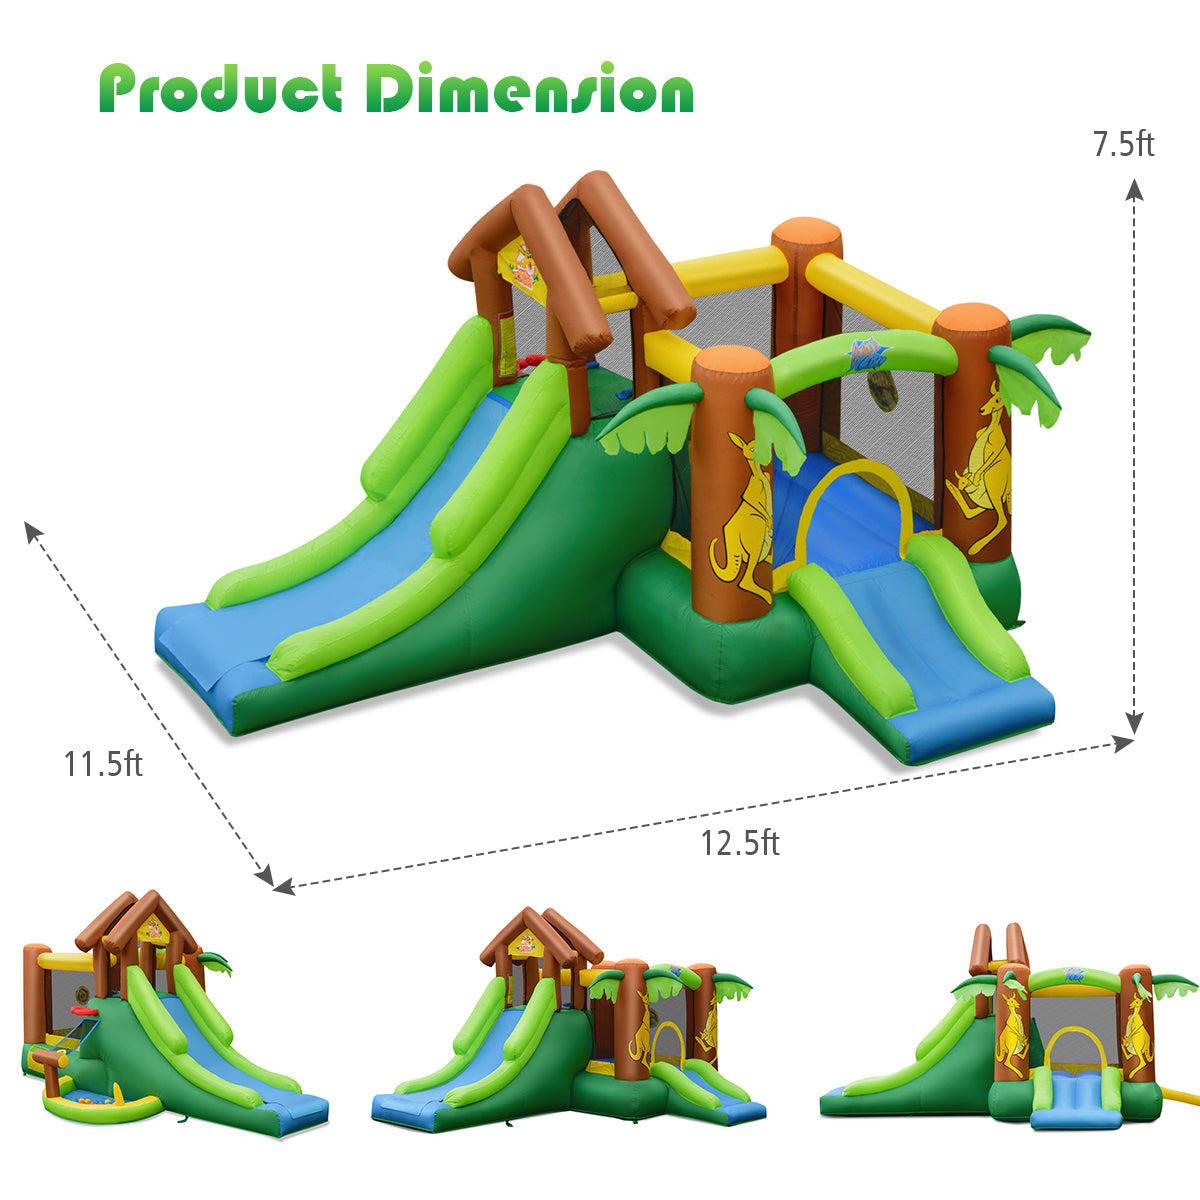 Detailed Product Information: Once inflated, the bounce house measures 12.5 ft (L) x 11.5 ft (D) x 7.5 ft (H). It comes with a 750W air blower, a repair kit, a convenient carrying bag, 2 Velcro balls, 30 ball pits, 5 bouncer stakes, and 2 air blower stakes. Recommended for children aged 3 to 10 years old.